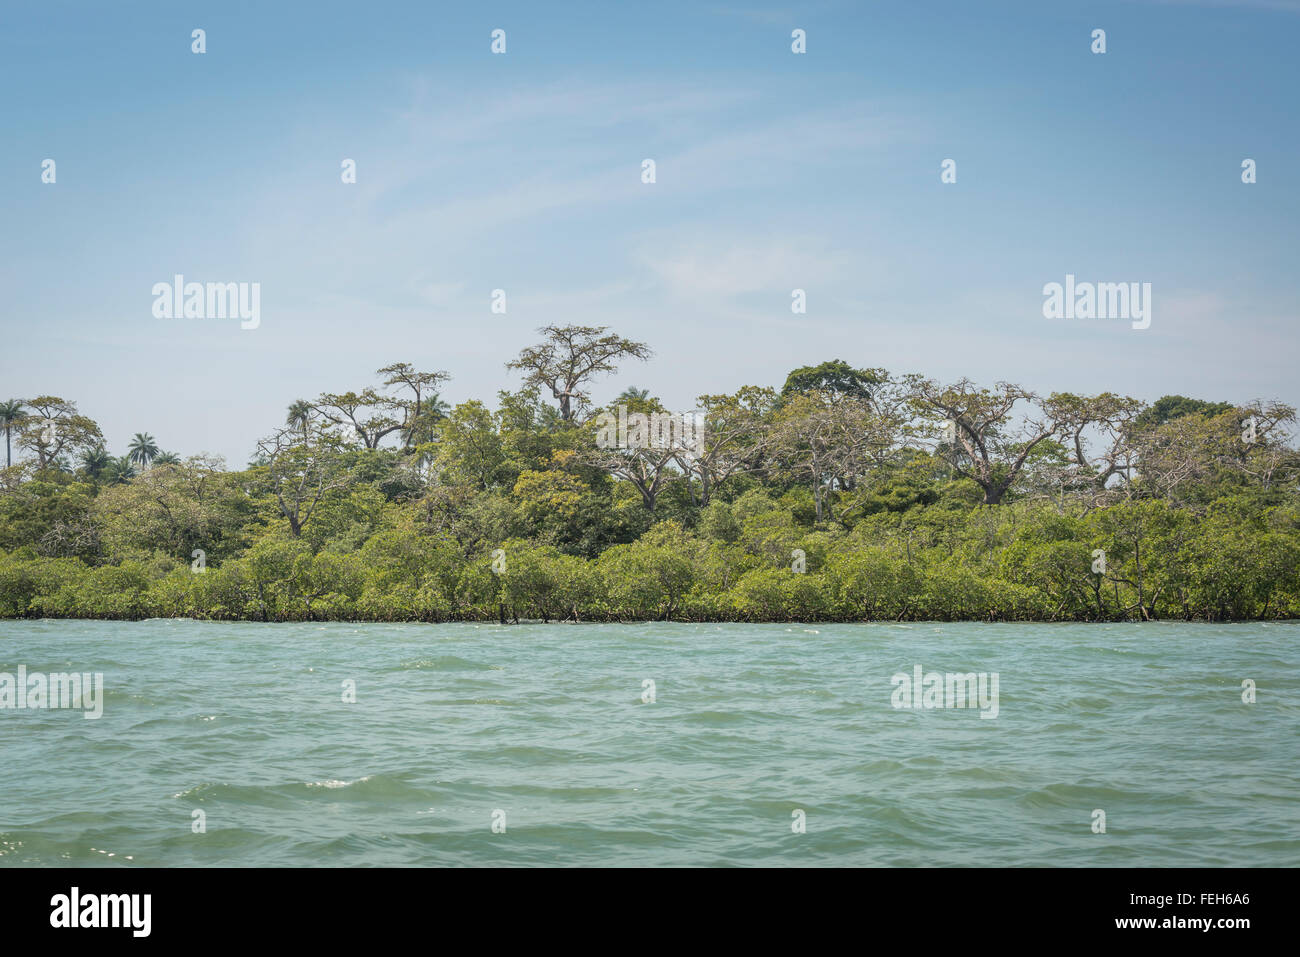 Tropical forests of the Bijagos islands, Guinea Bissau Stock Photo